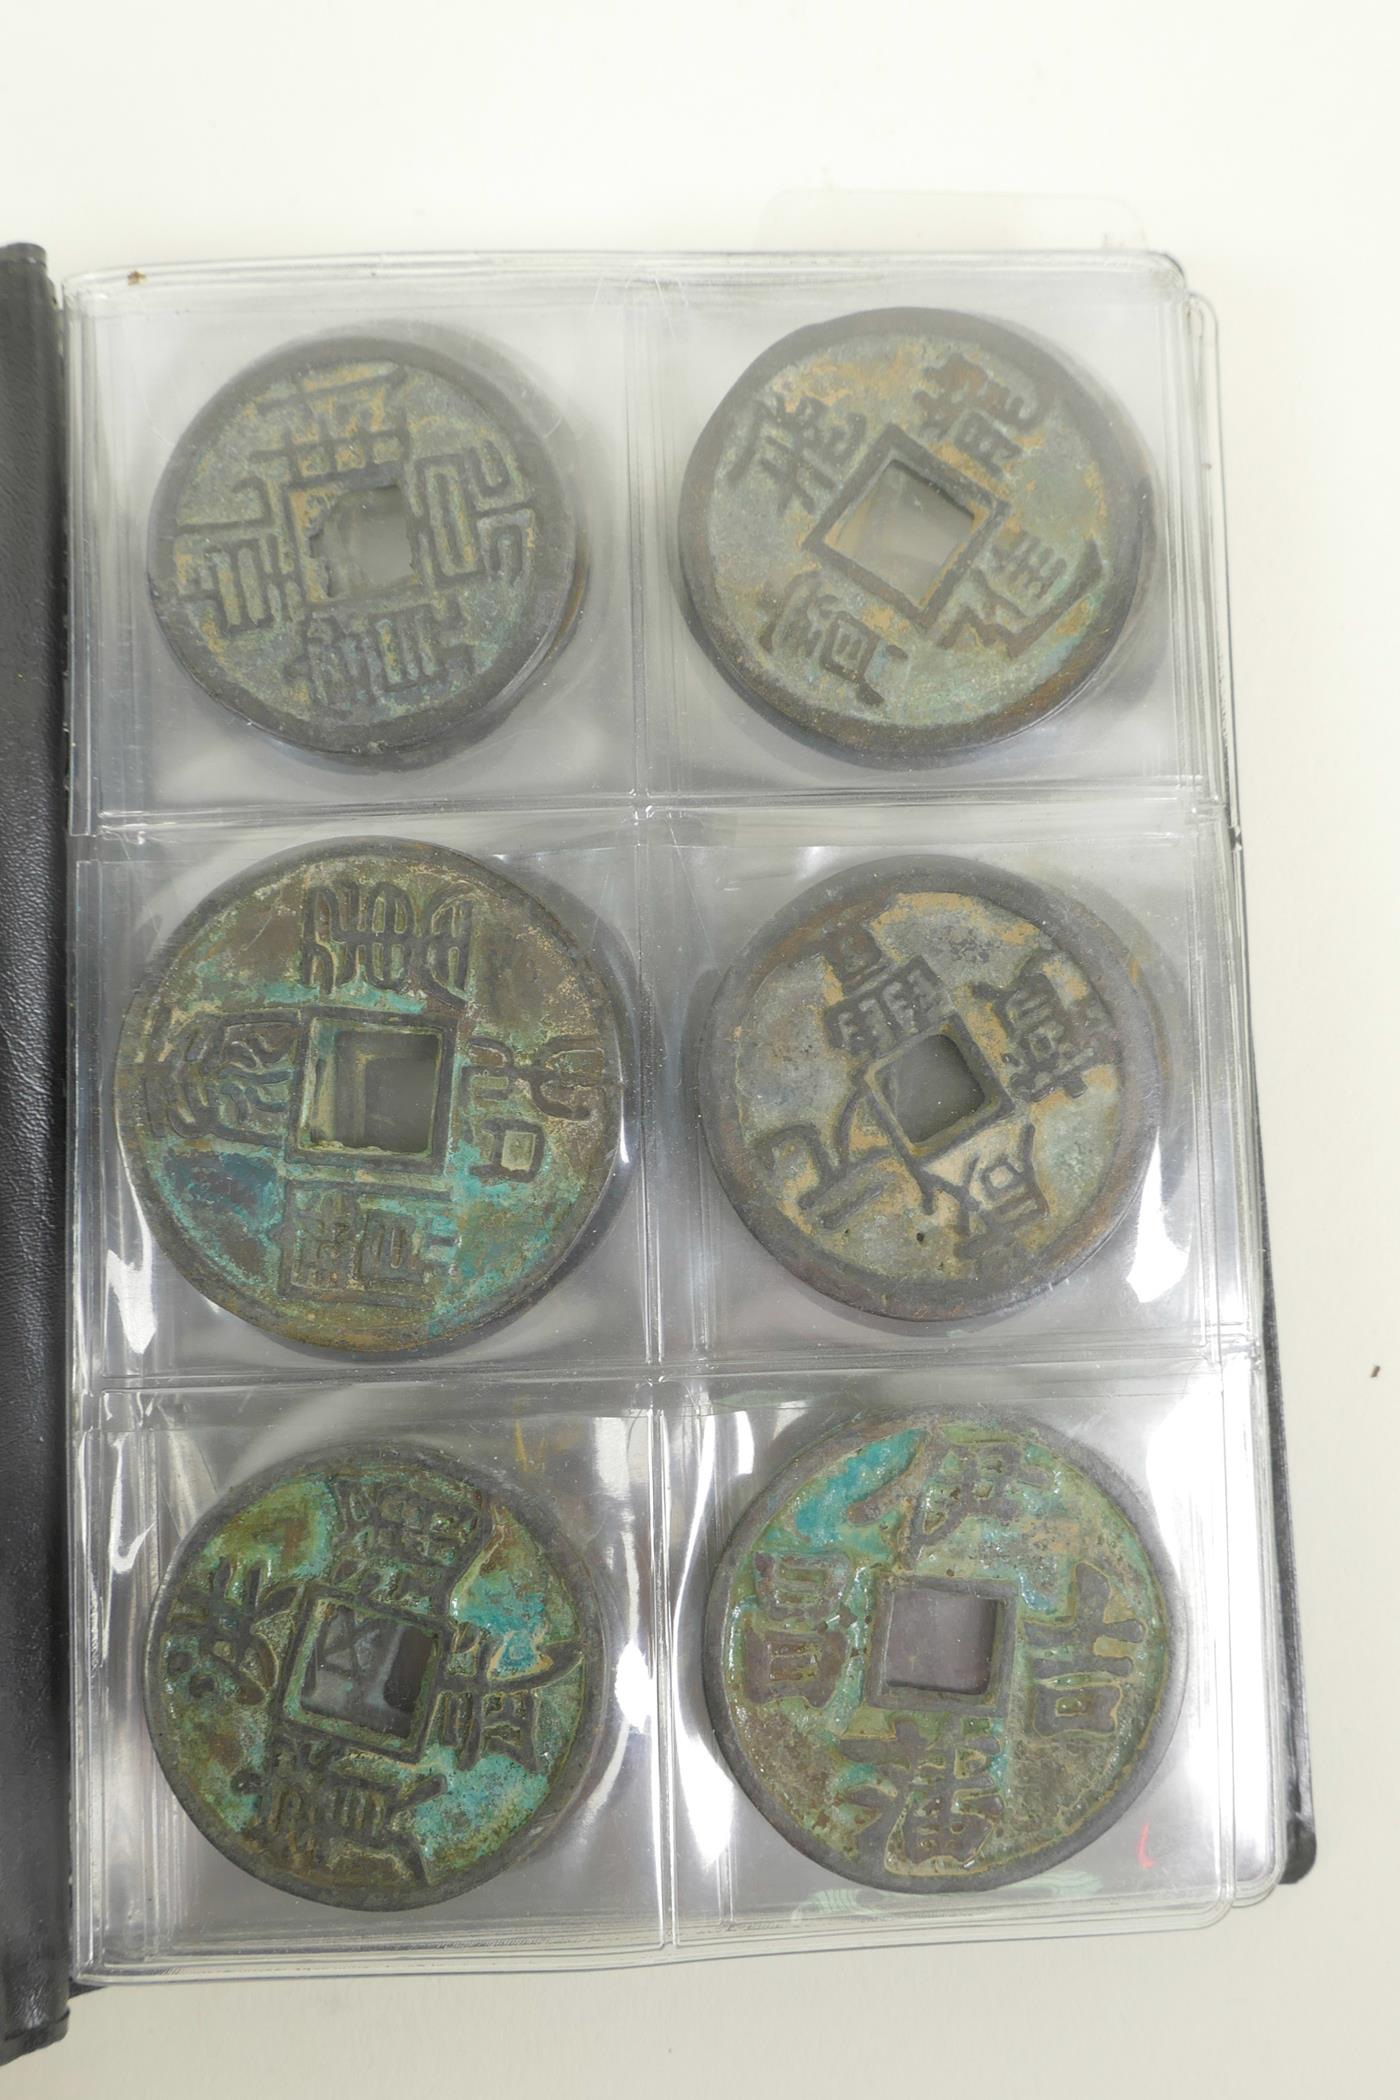 A wallet of Chinese facsimile (replica) bronze coinage, 1½" diameter - Image 4 of 5